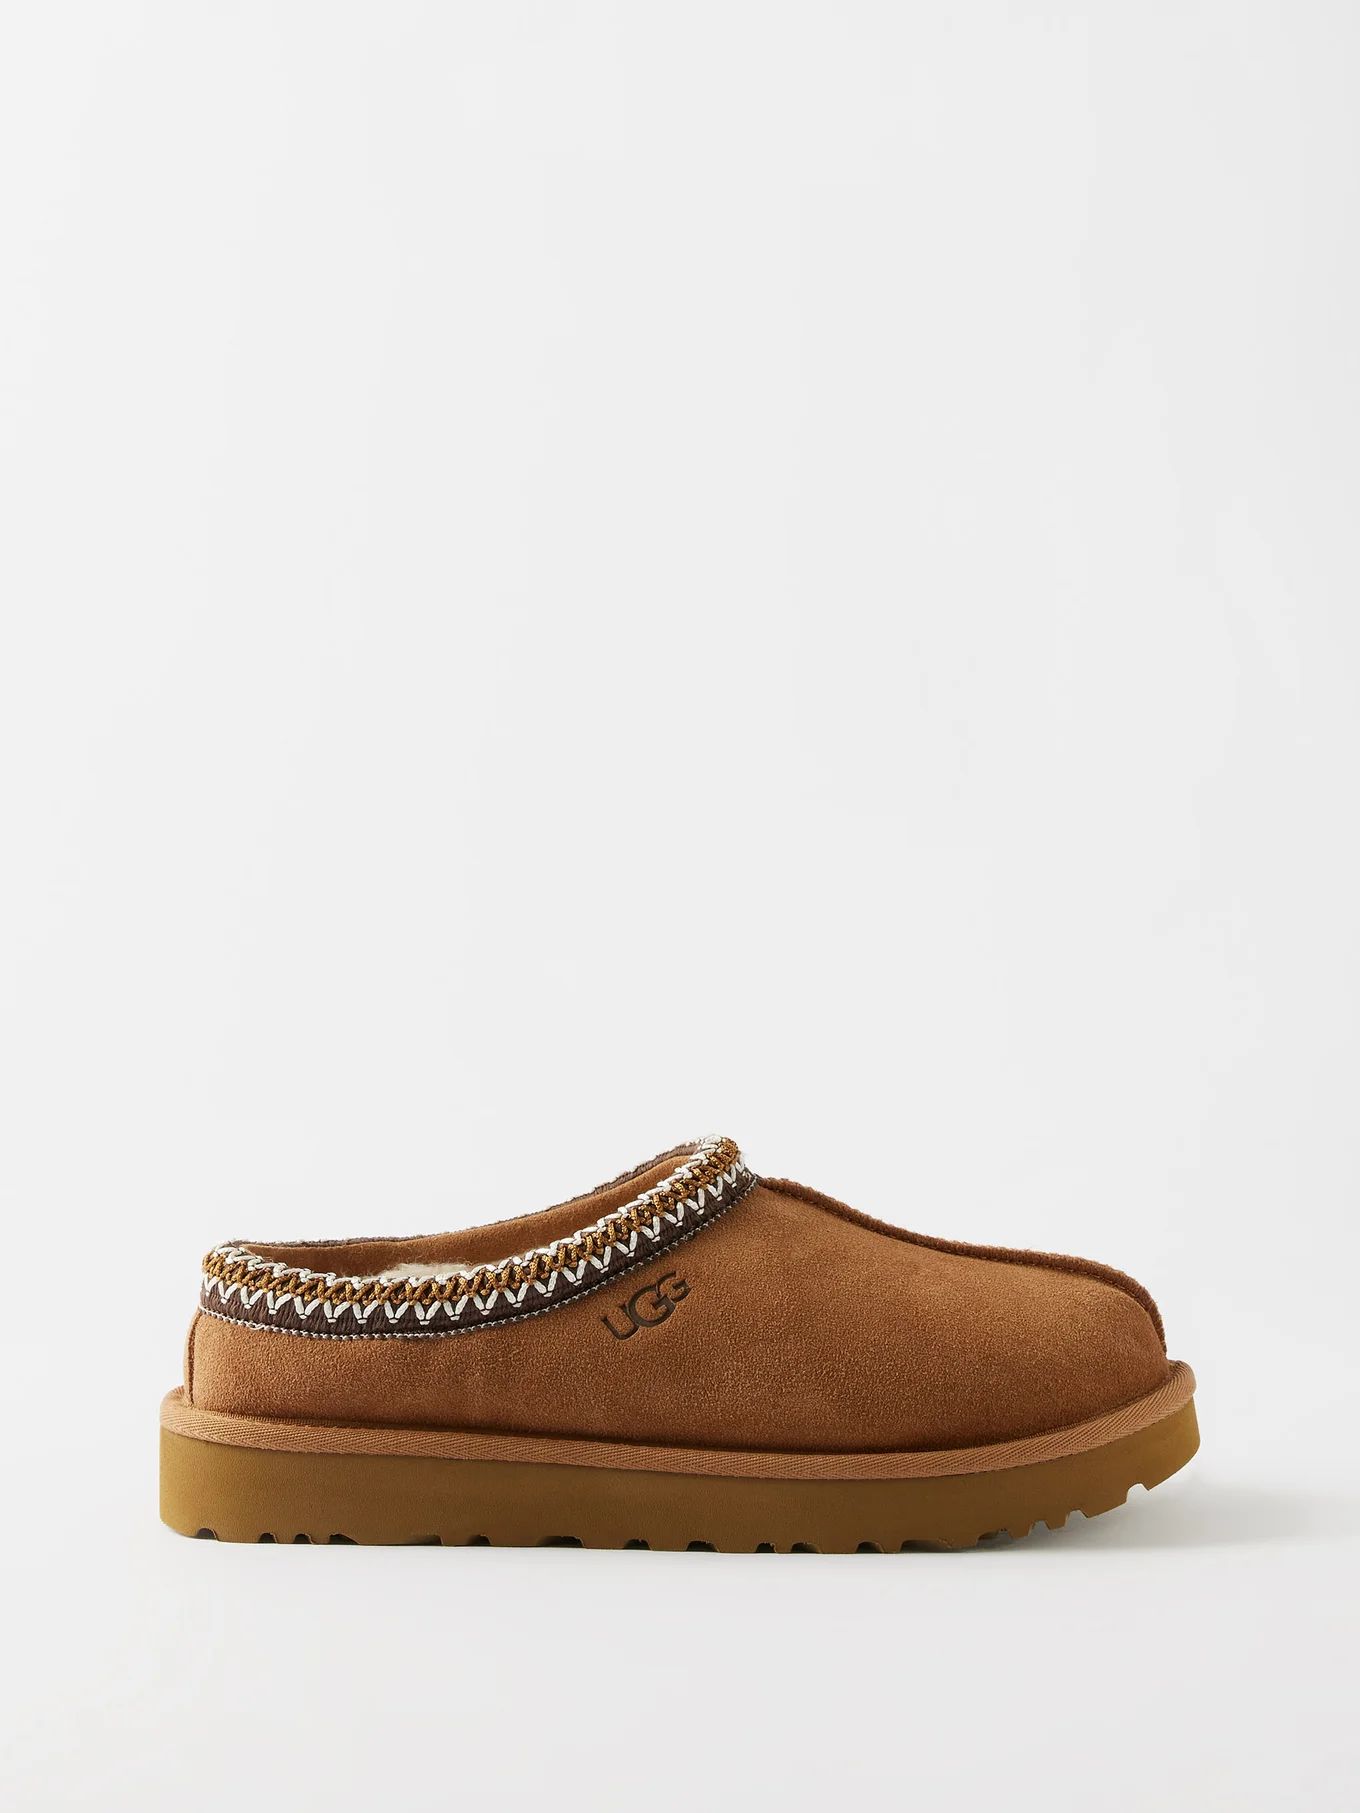 Tasman shearling-lined suede slippers | Ugg | Matches (UK)